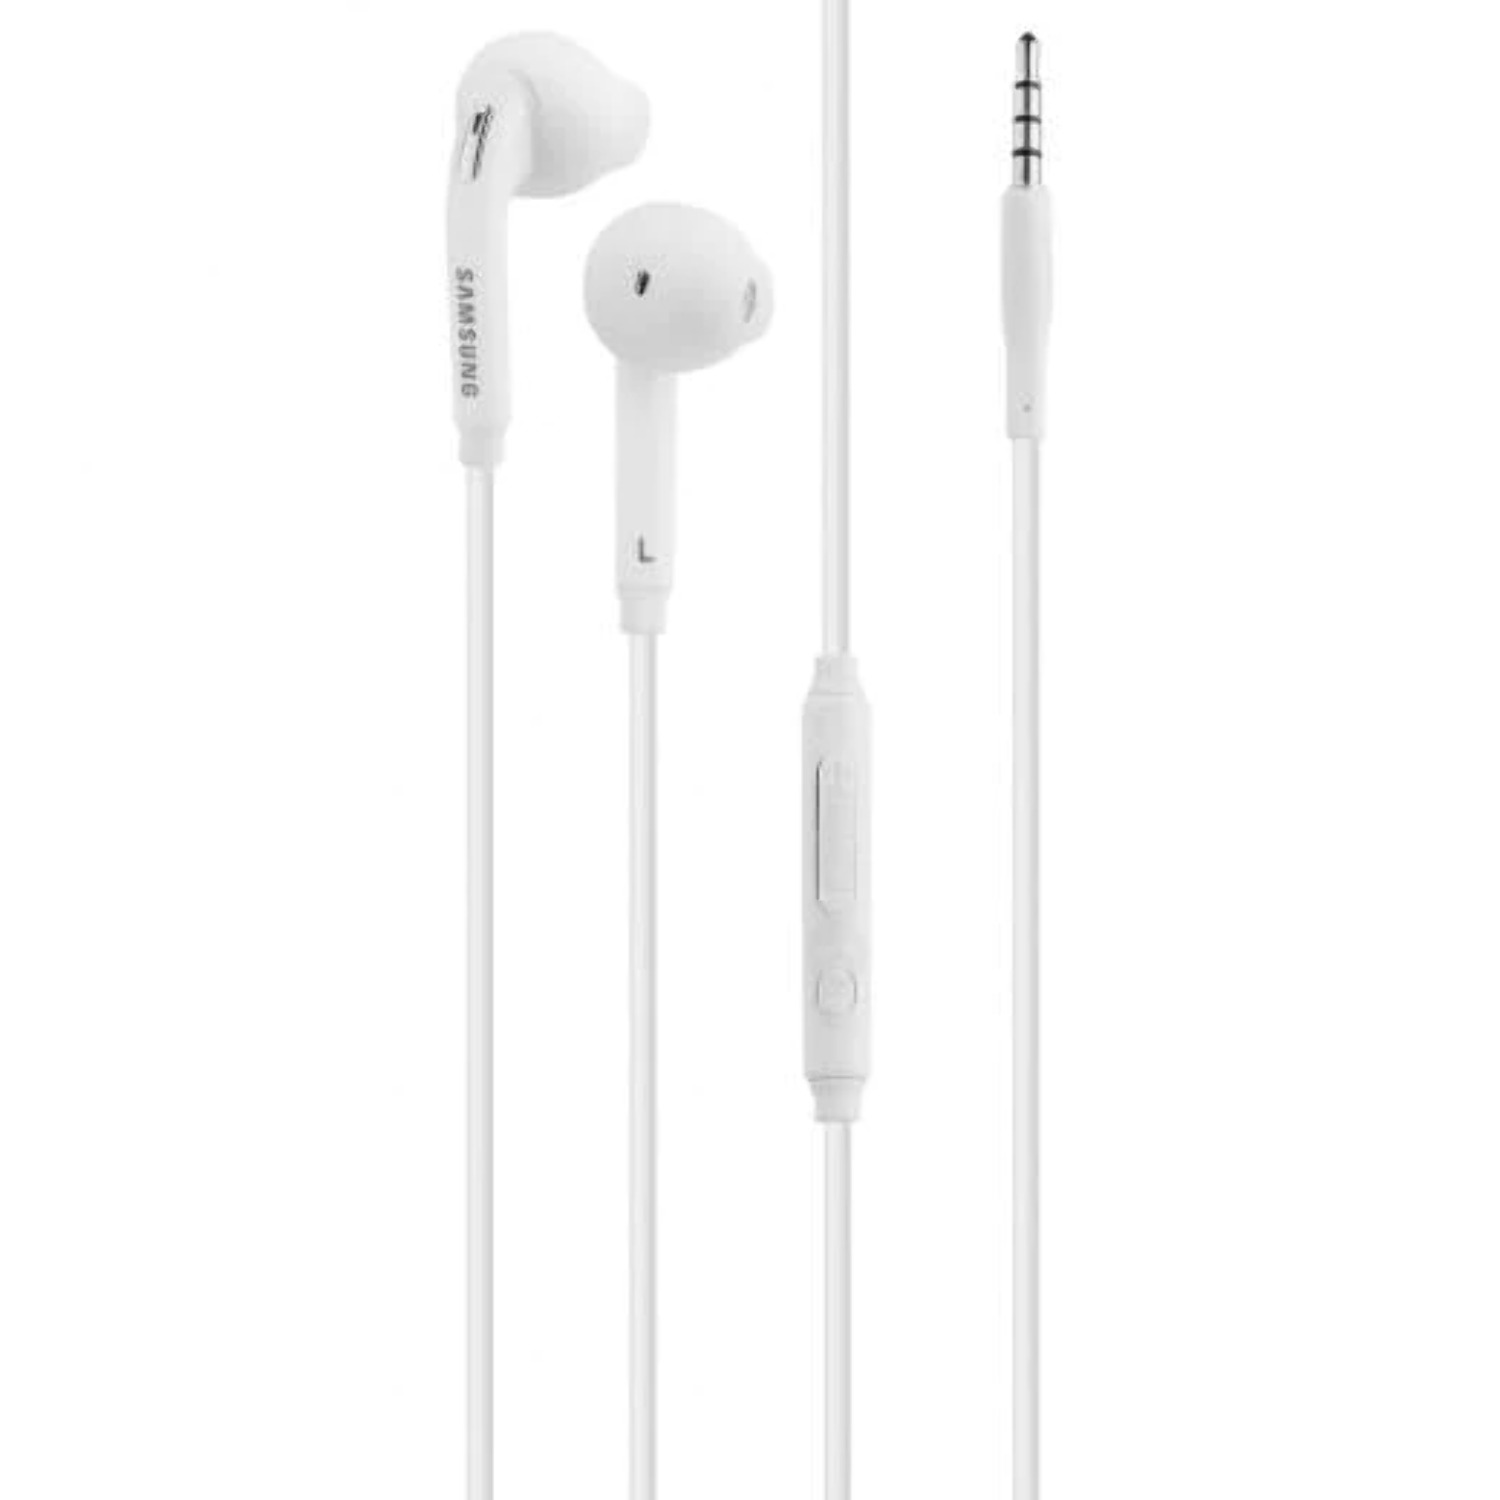 Premium Wired Headset 3.5mm Earbud Stereo In-Ear Headphones with in-line Remote & Microphone Compatible with Nokia Lumia 2520 - image 1 of 1